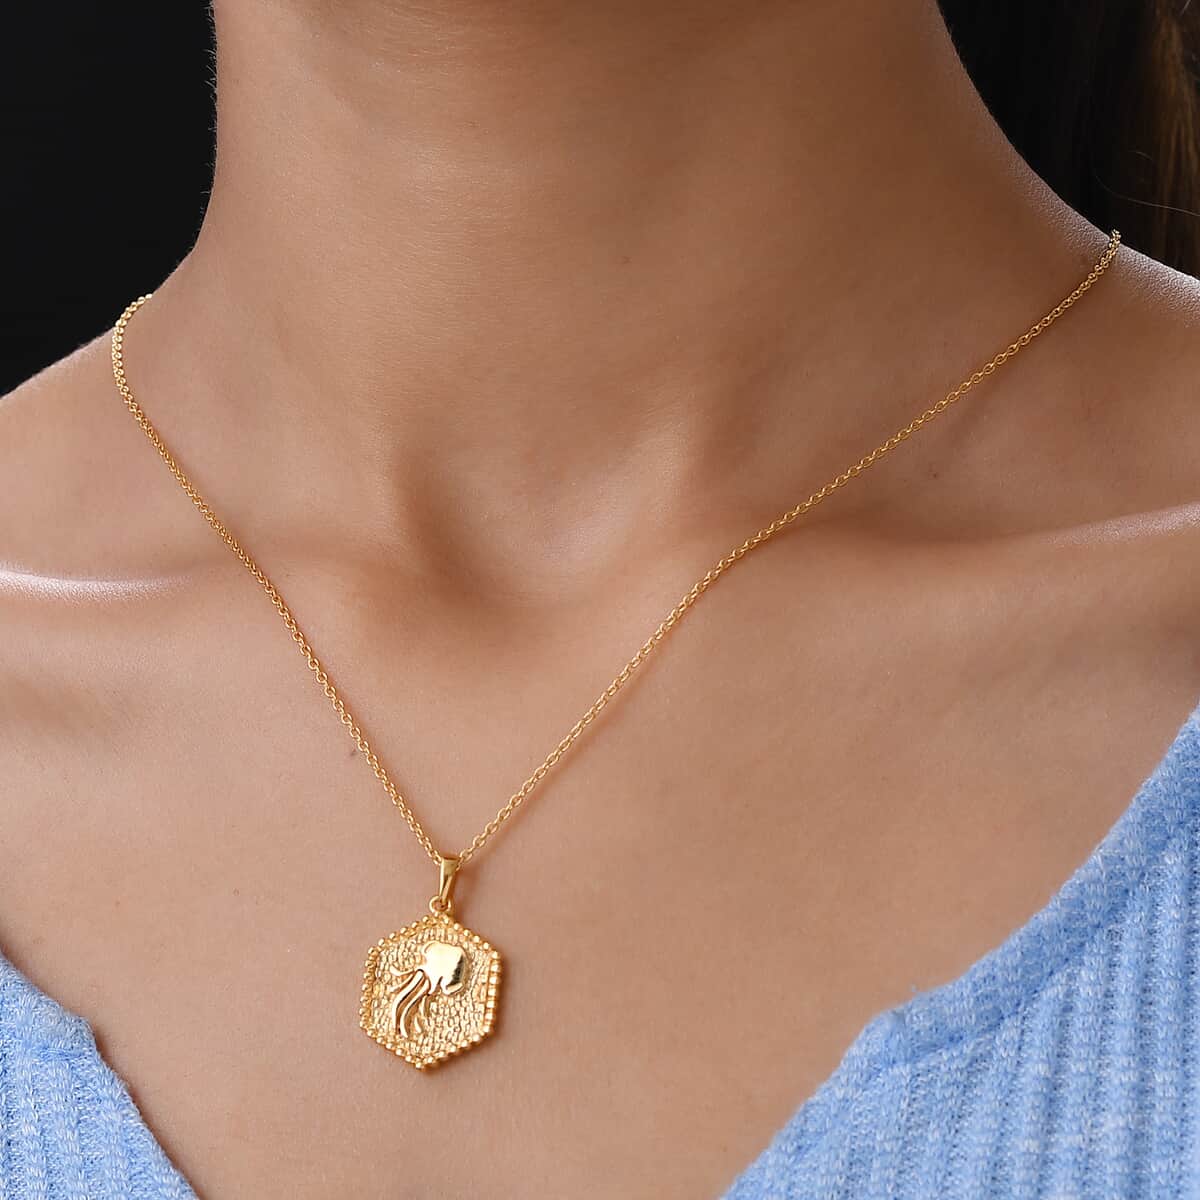 Karis Aquarius Zodiac Pendant in 18K YG Plated with ION Plated Yellow Gold Stainless Steel Necklace 20 Inches image number 2